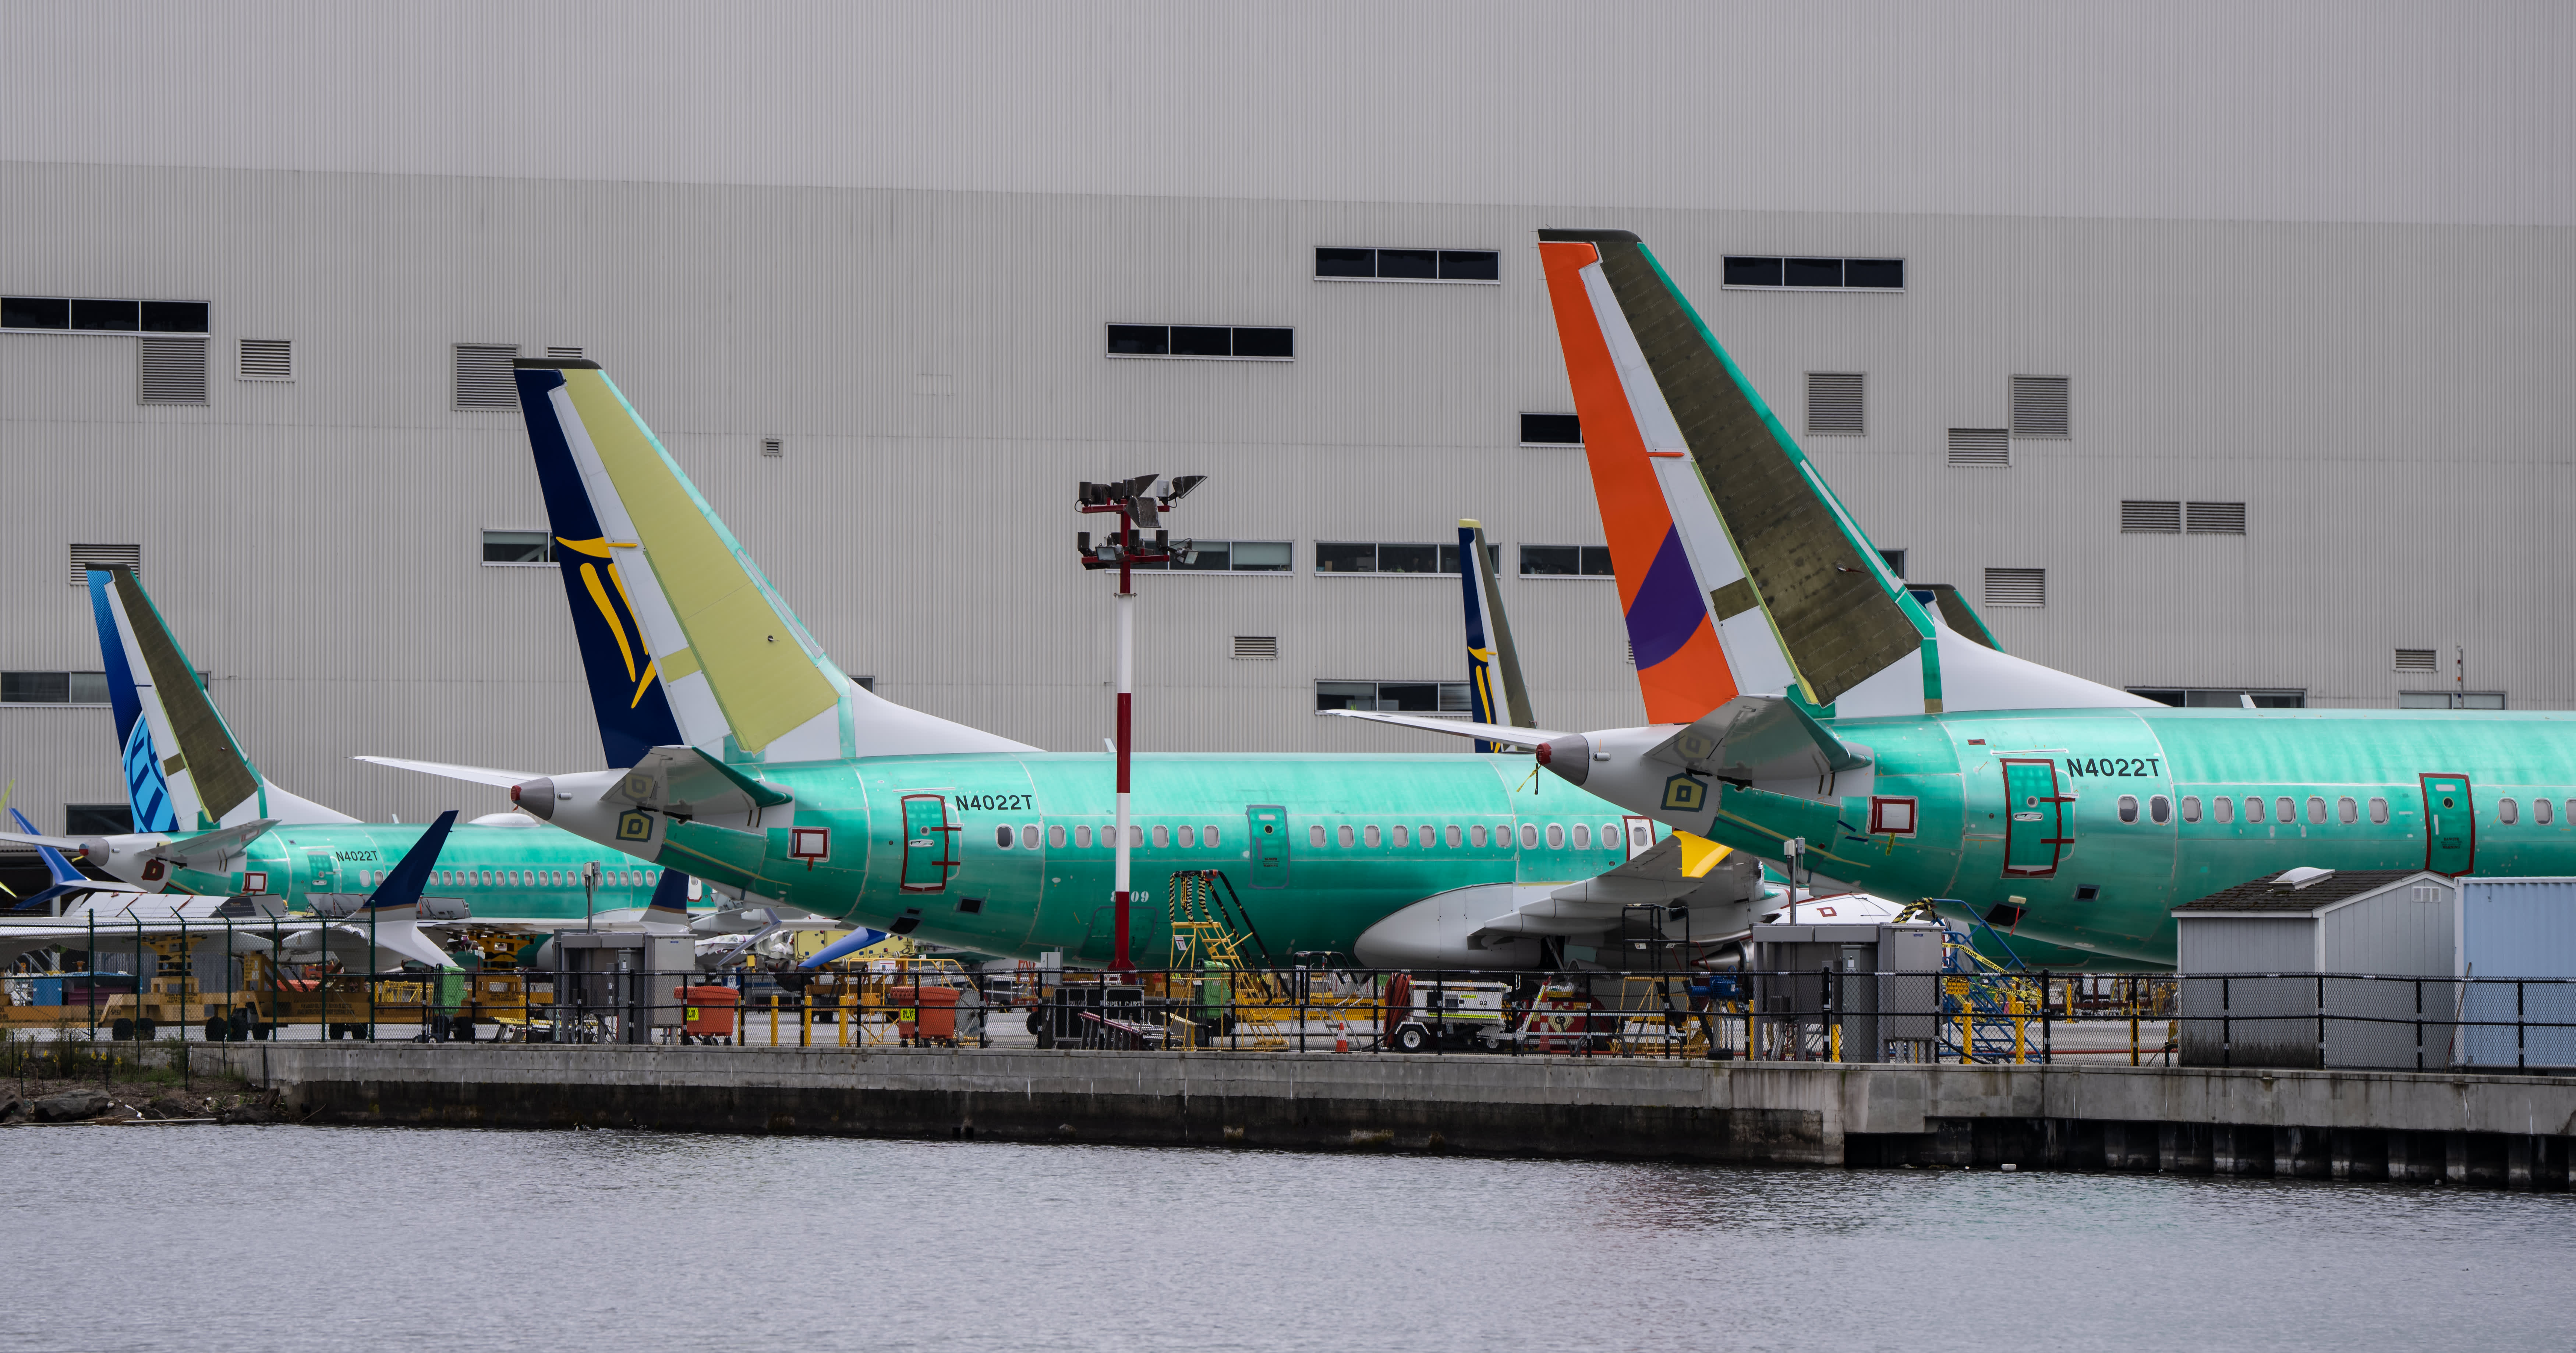 Boeing aircraft deliveries decreased during the first quarter amid the safety crisis